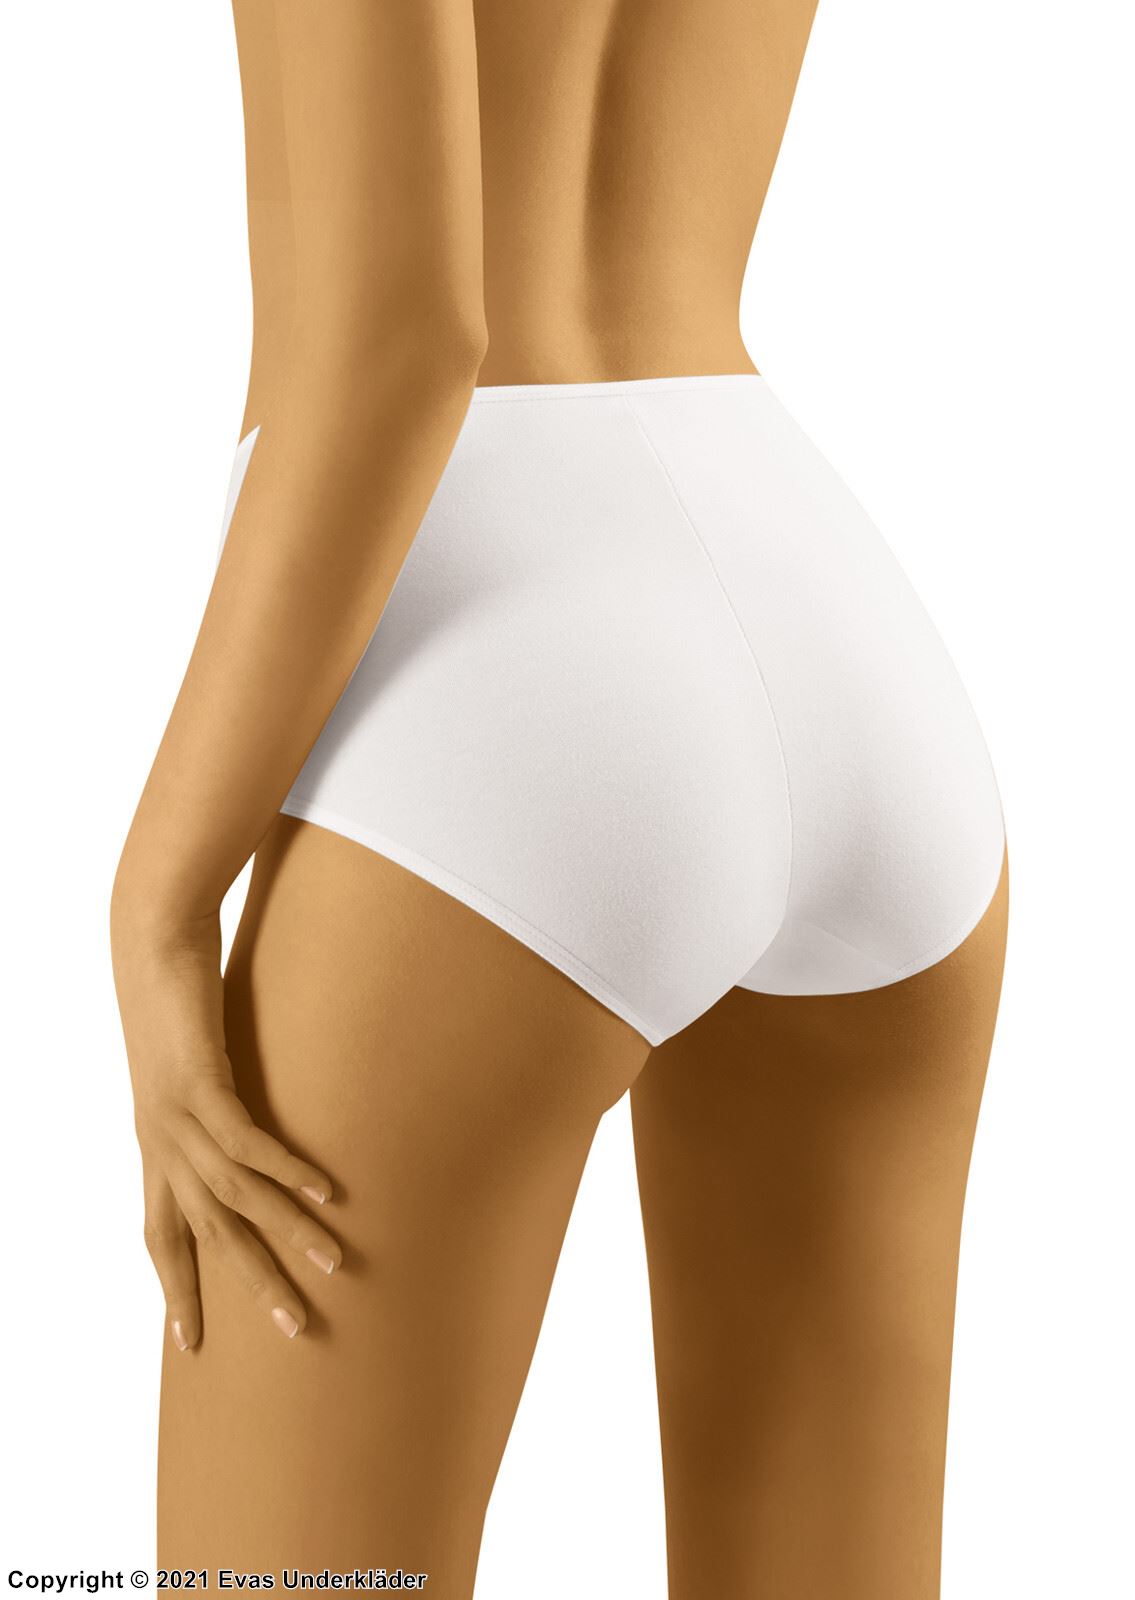 Maxi briefs, smooth and comfortable fabric, high waist, S to 3XL